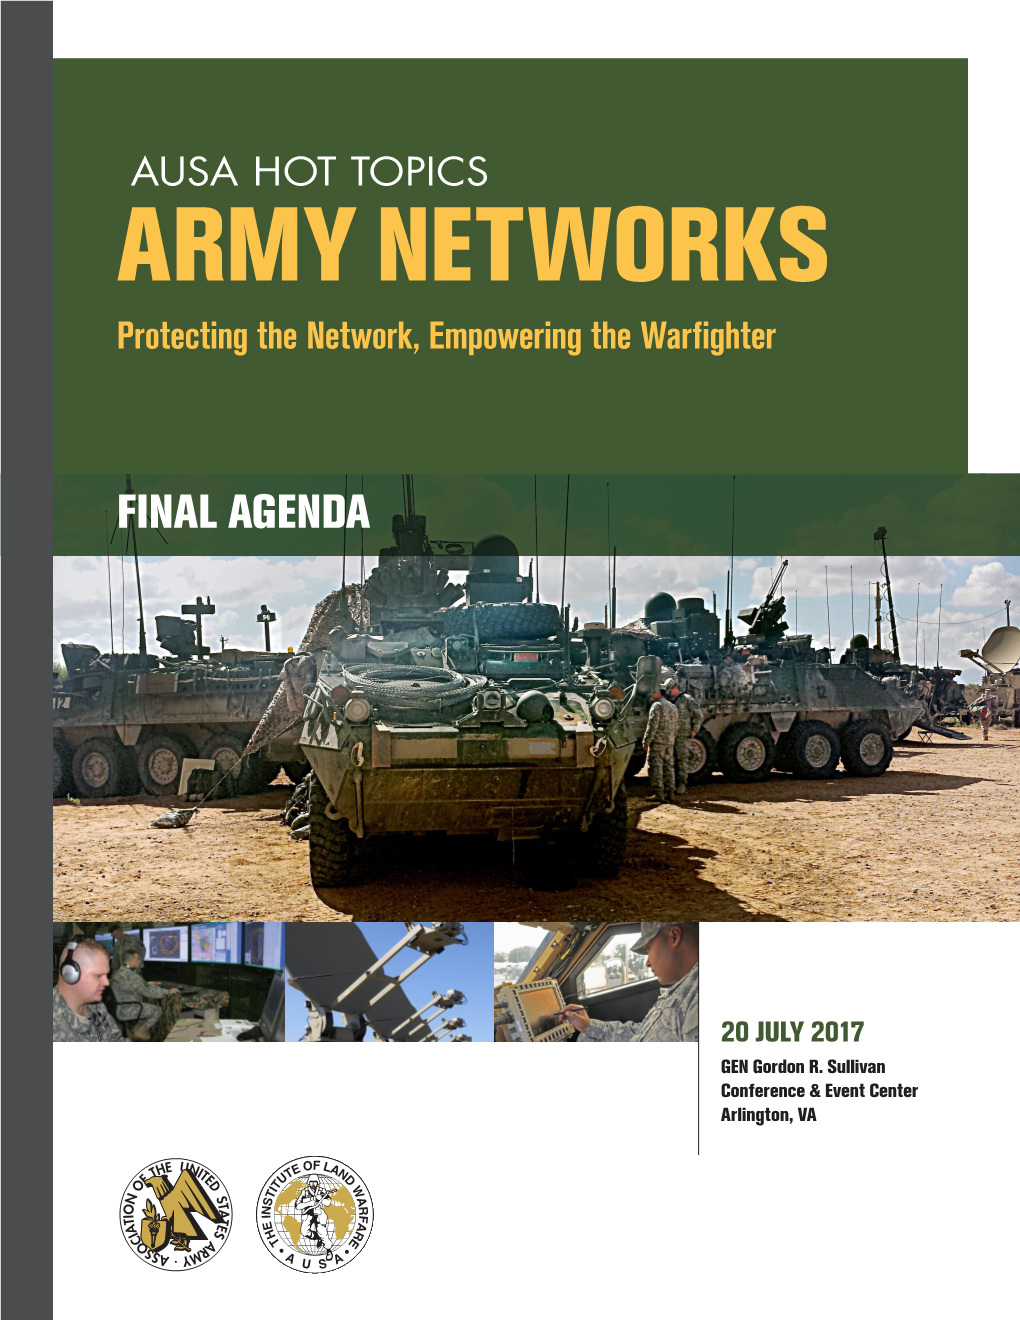 ARMY NETWORKS Protecting the Network, Empowering the Warfighter